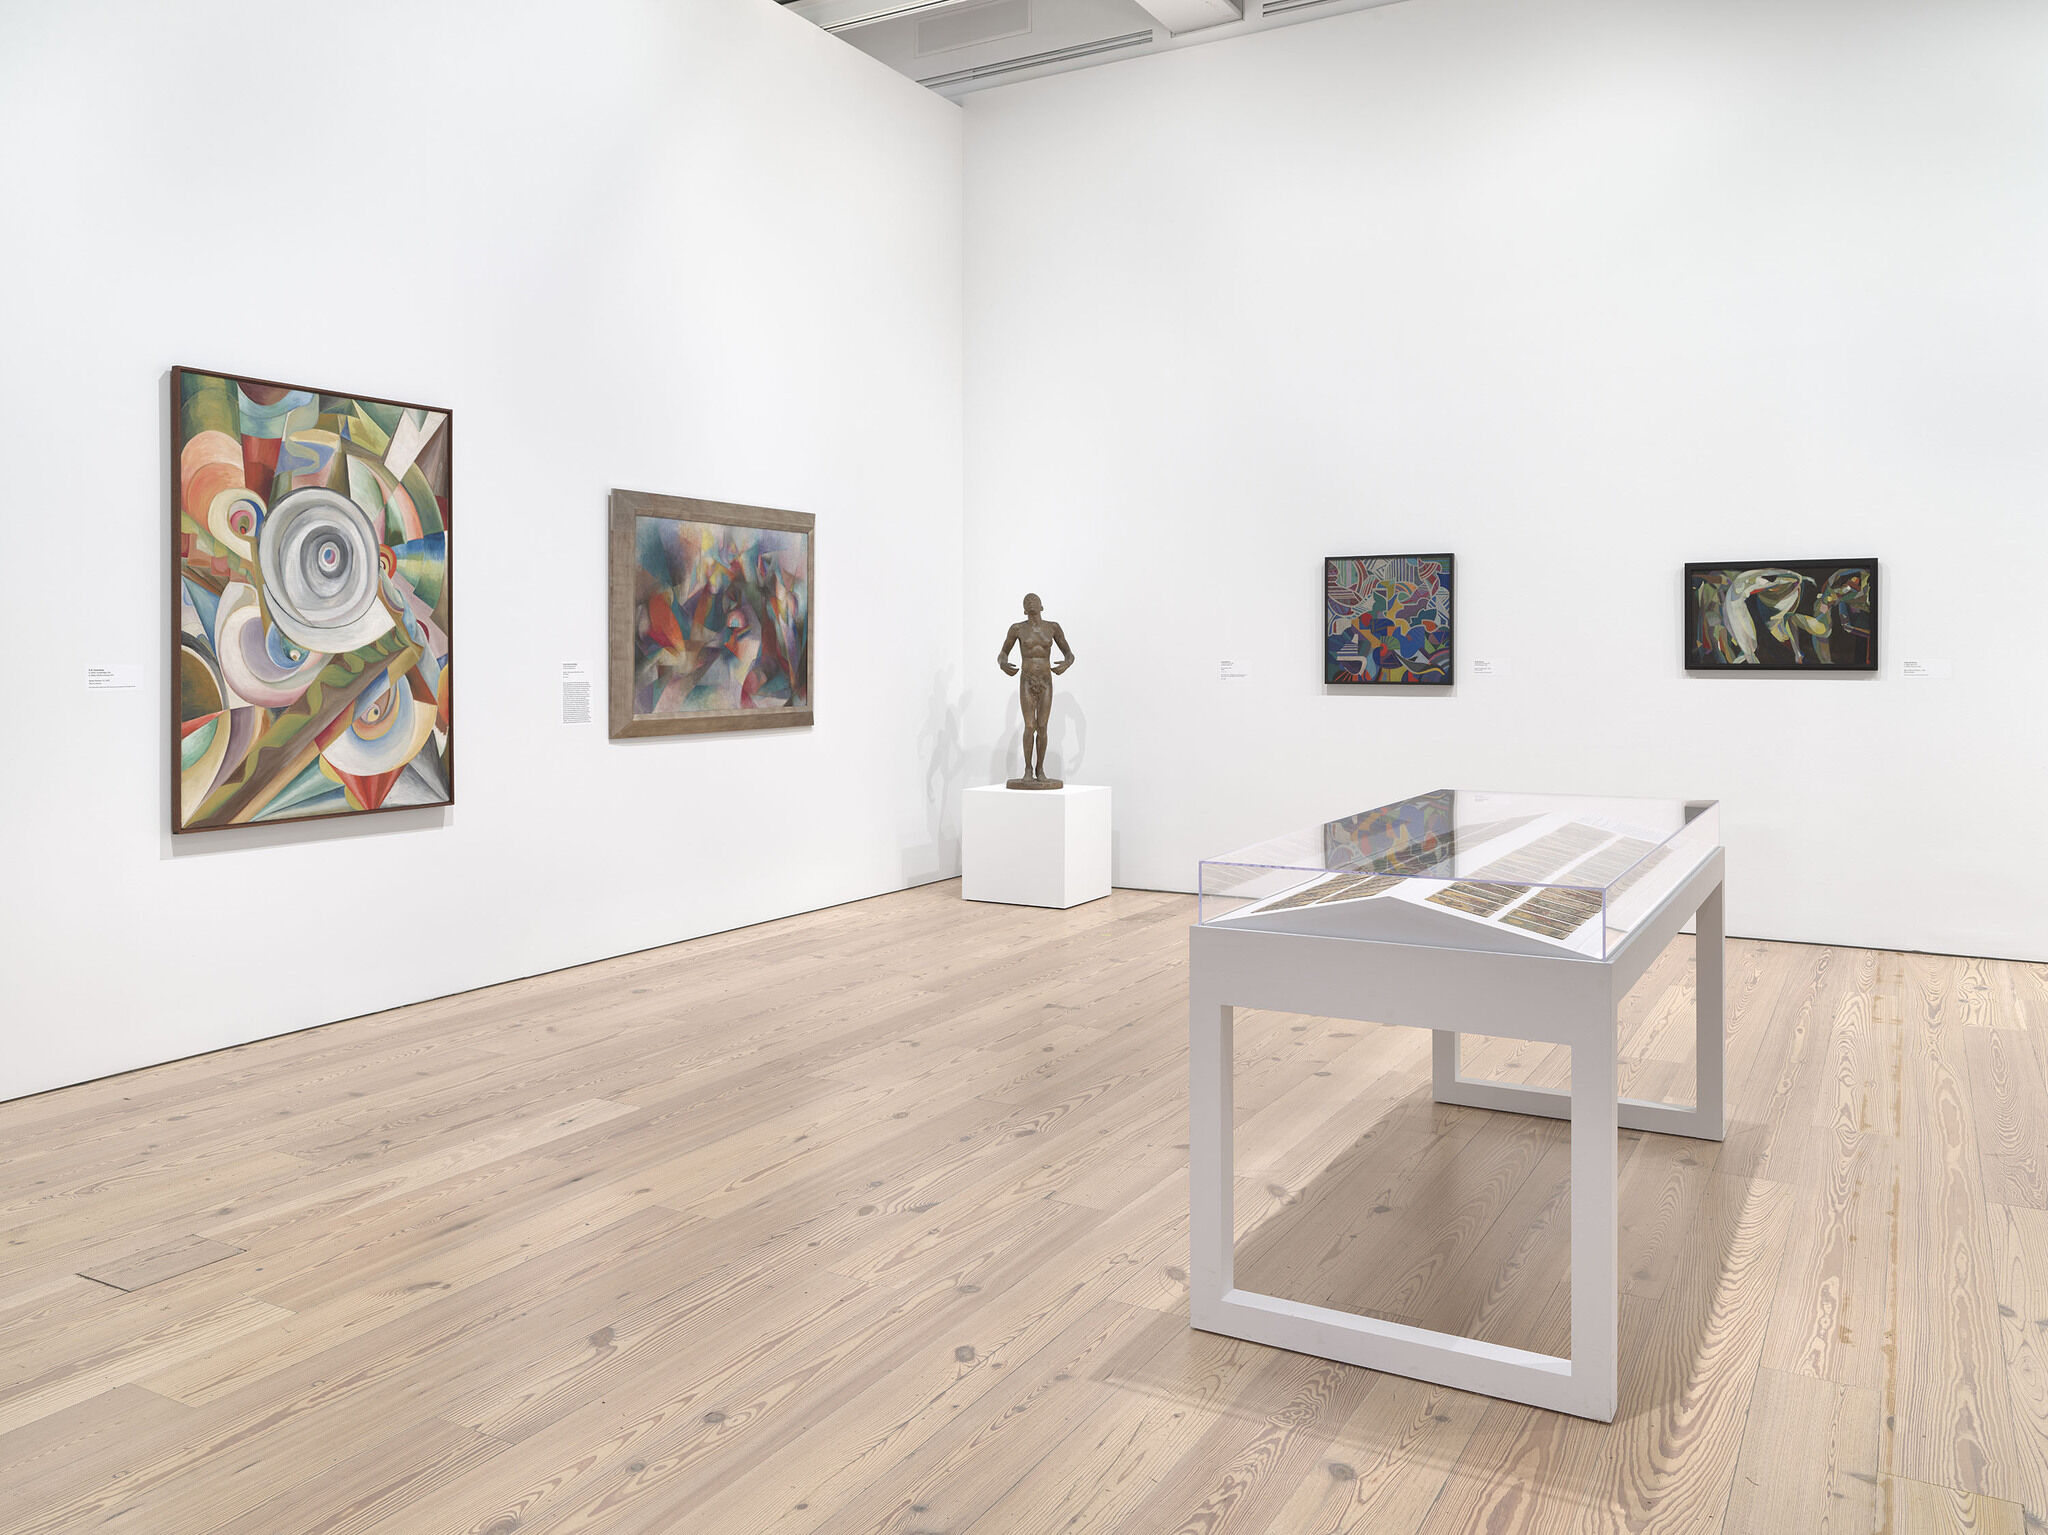 A white exhibition room with four works mounted on the walls and and a fifth work on display in a vitrine in the center of the room.